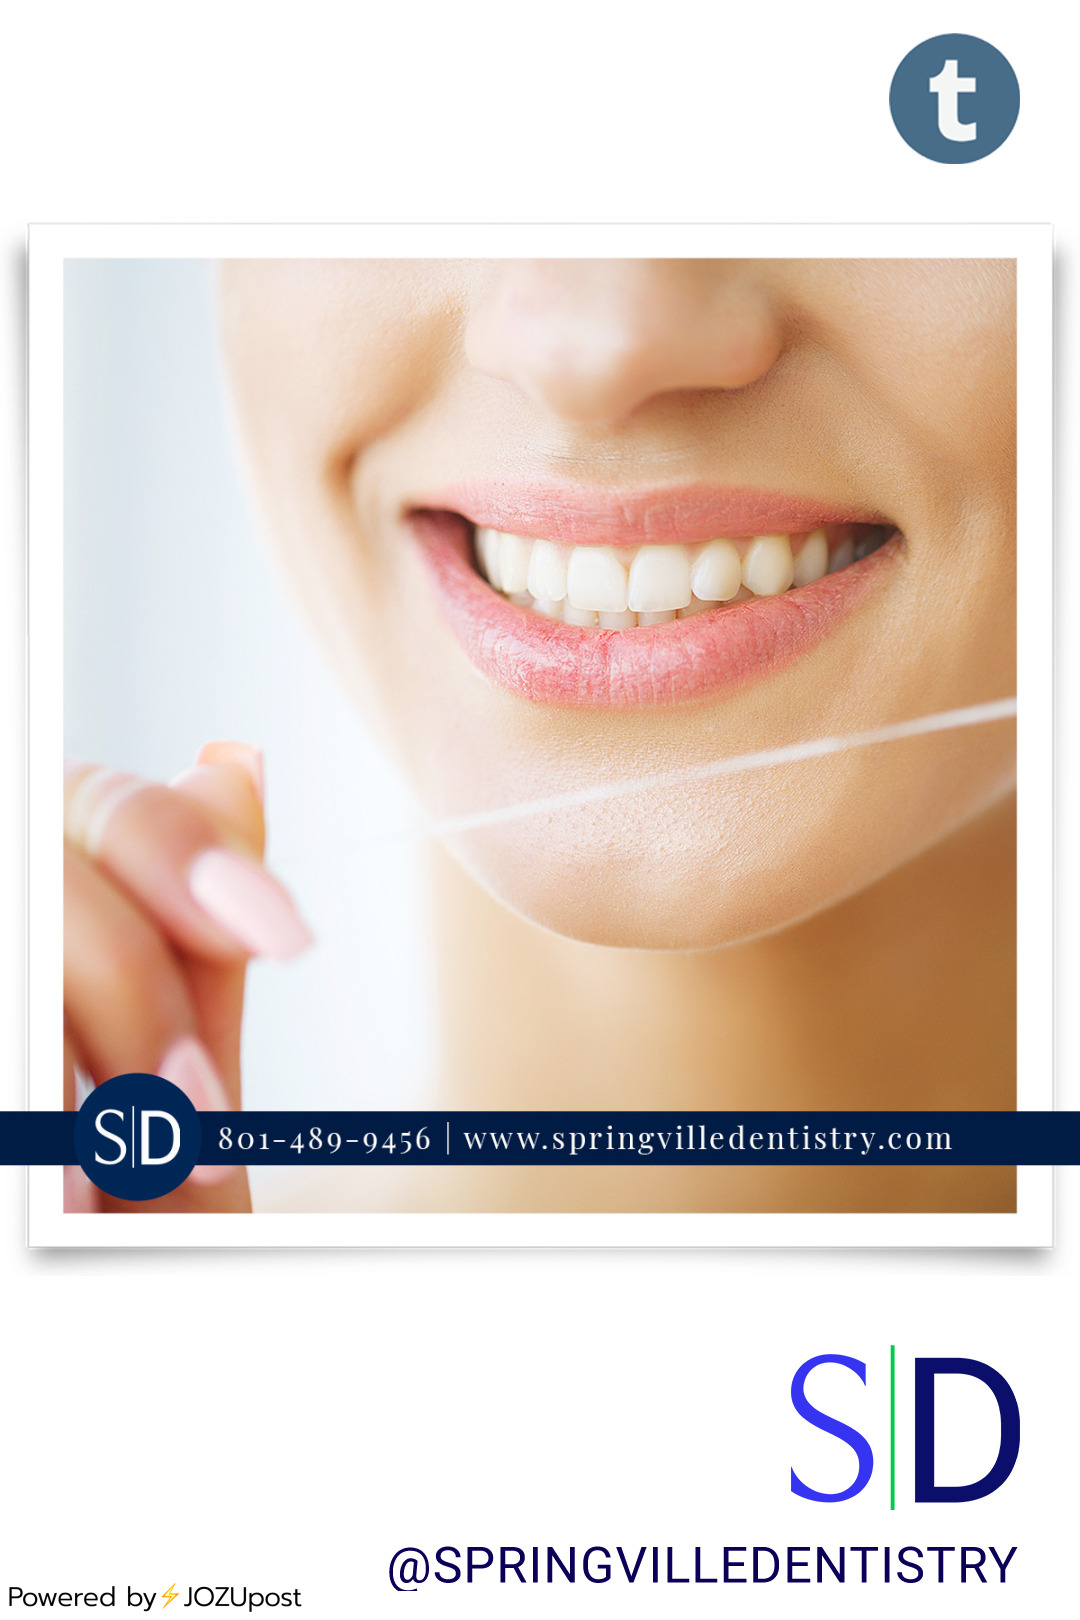 At Springville Dentistry, we believe in the importance of good oral hygiene, with flossing being a cornerstone of a bright smile.
However, excessive or incorrect flossing can cause harm. Over-flossing can lead to symptoms like bleeding gums, redness,...